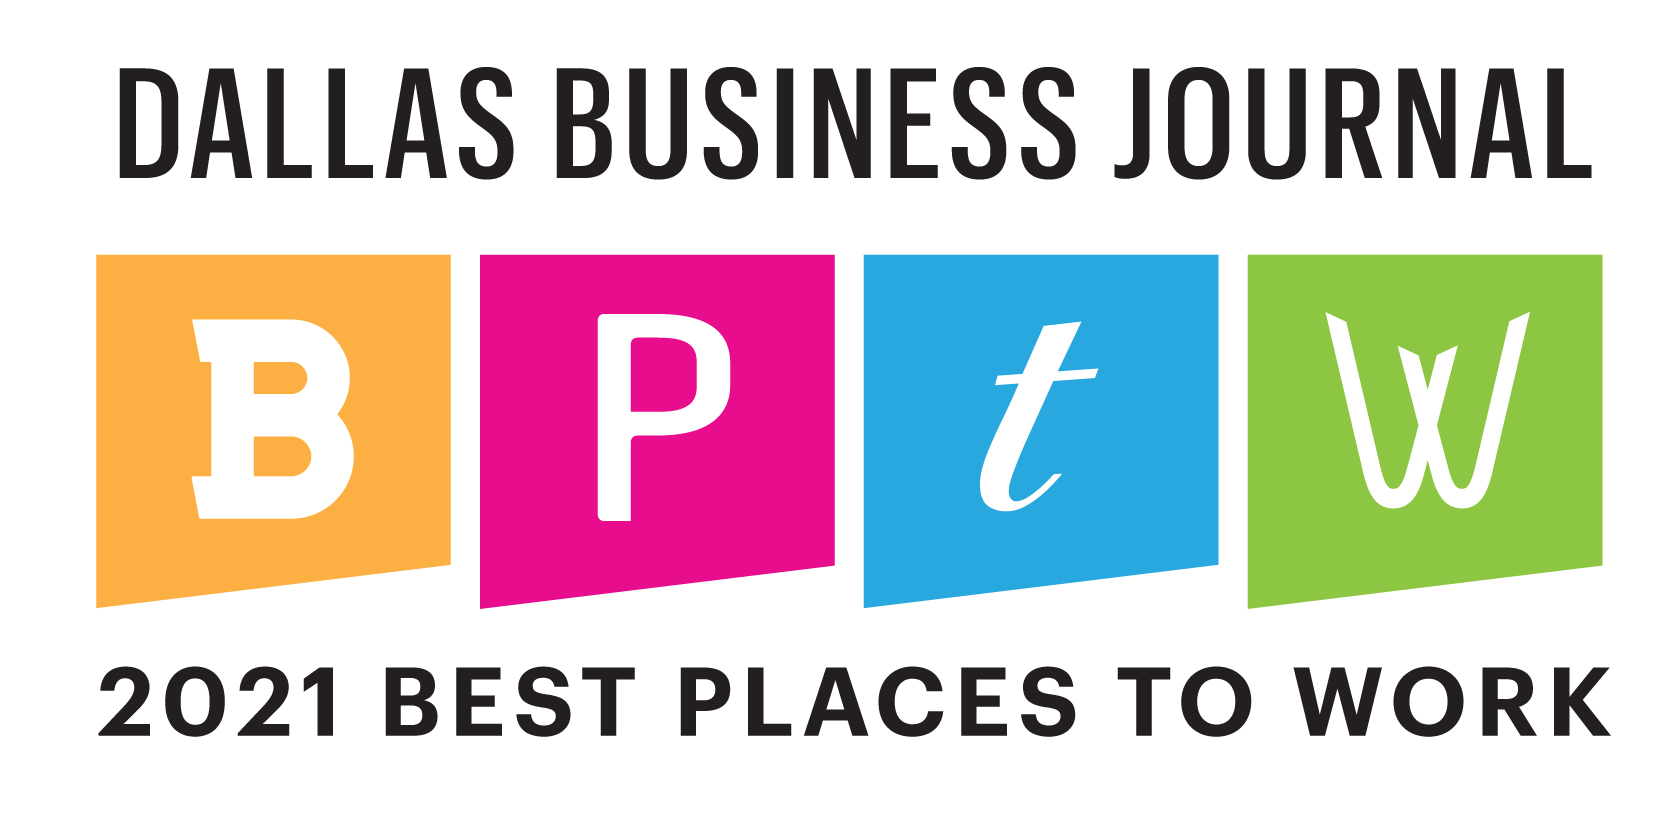 Dallas Business Journal Best Places to Work 2021